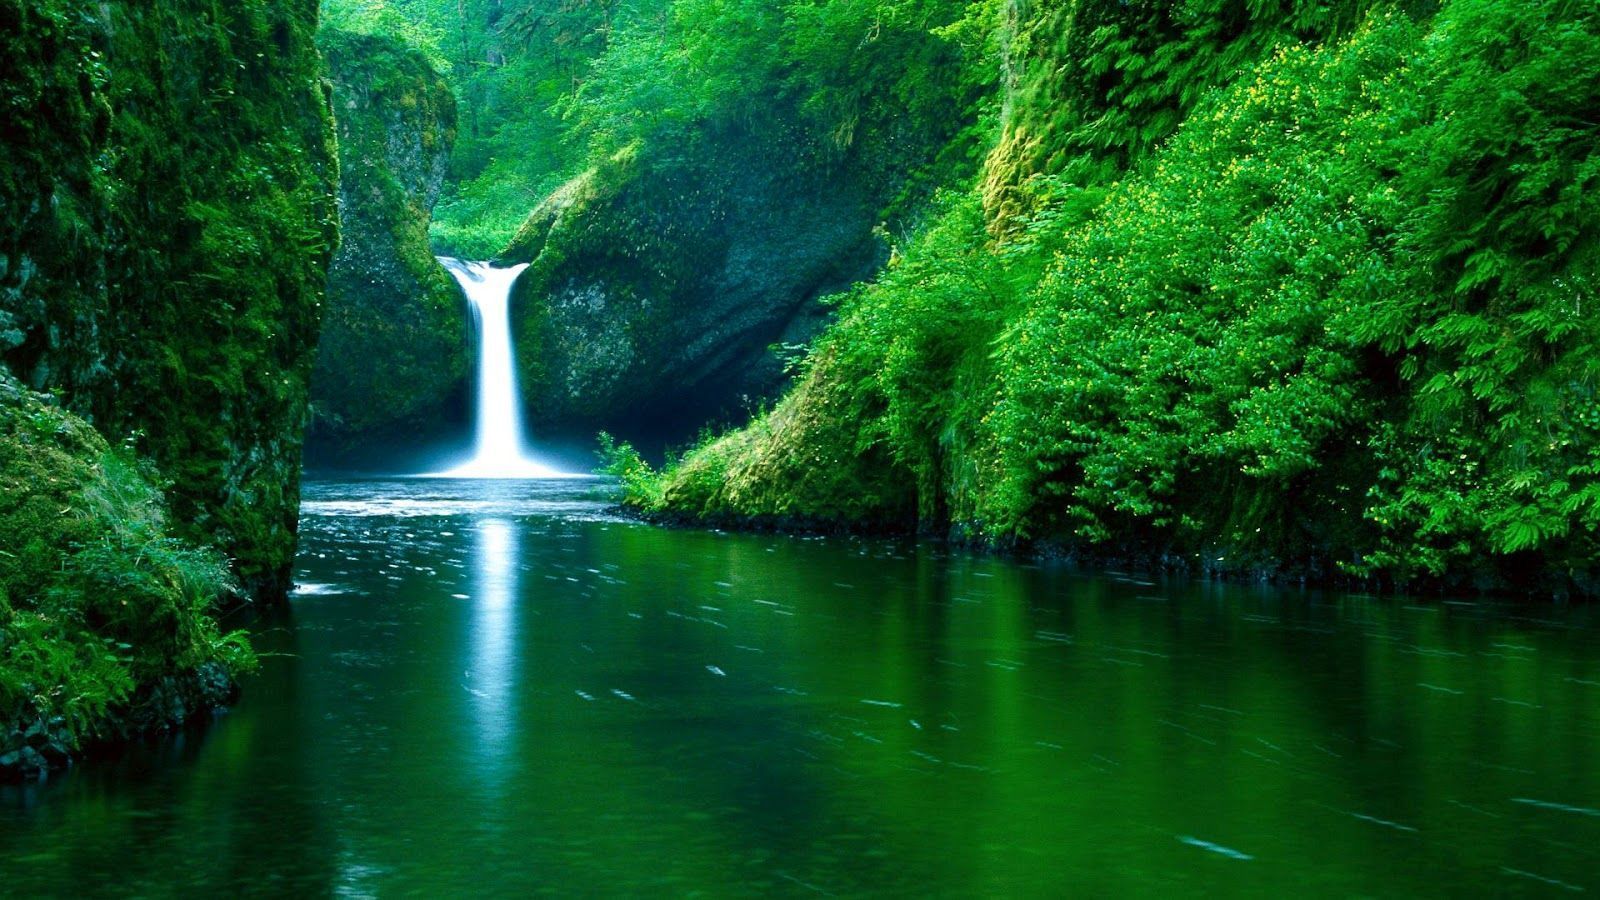 Waterfall forest green full HD nature background wallpaper for laptop widescreen